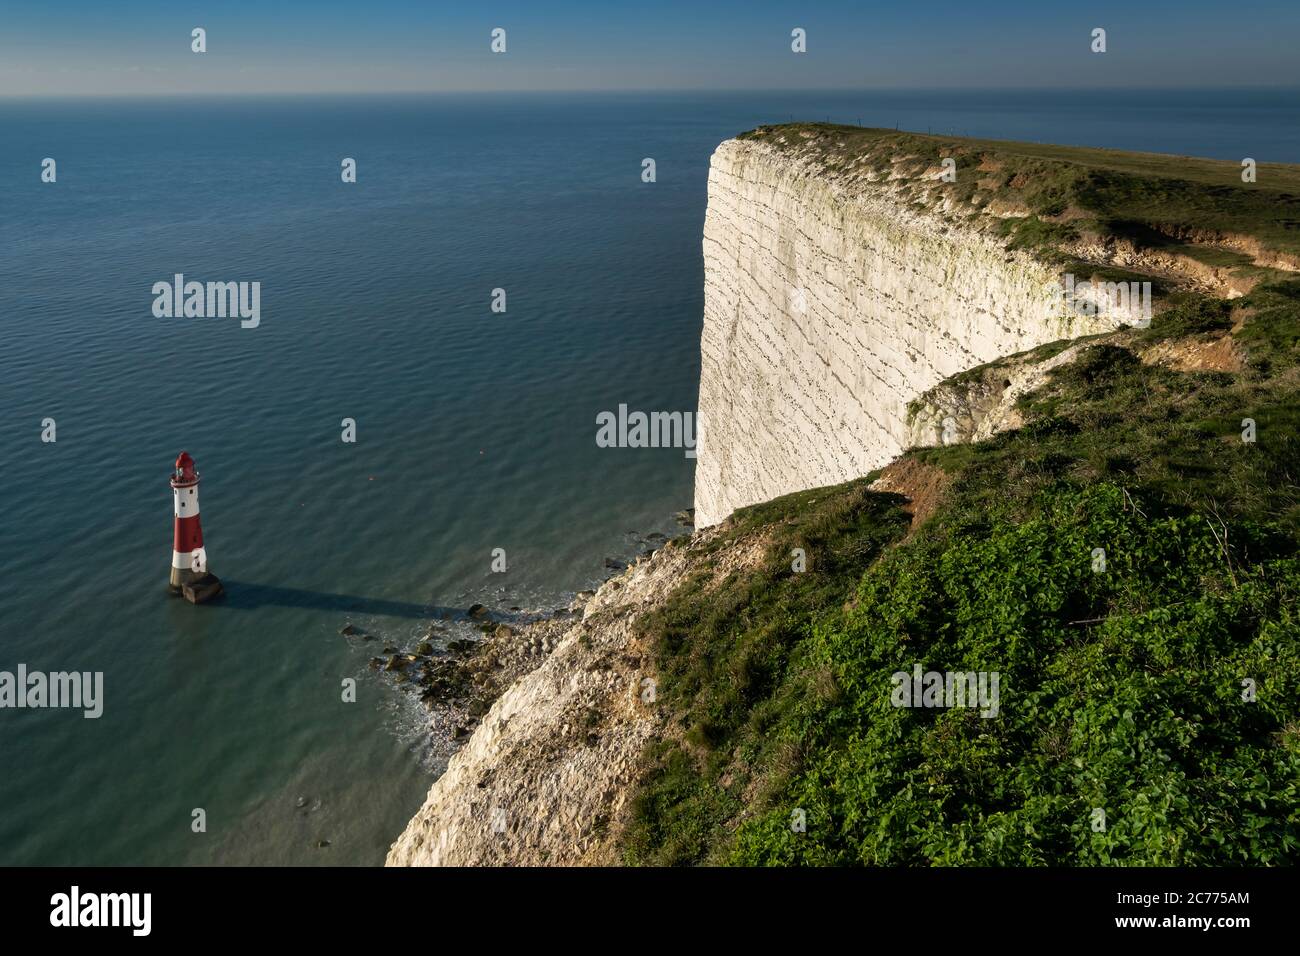 Beachy Head Lighthouse & Beachy Head, vicino a Eastbourne, South Downs National Park, East Sussex, Inghilterra, Regno Unito Foto Stock